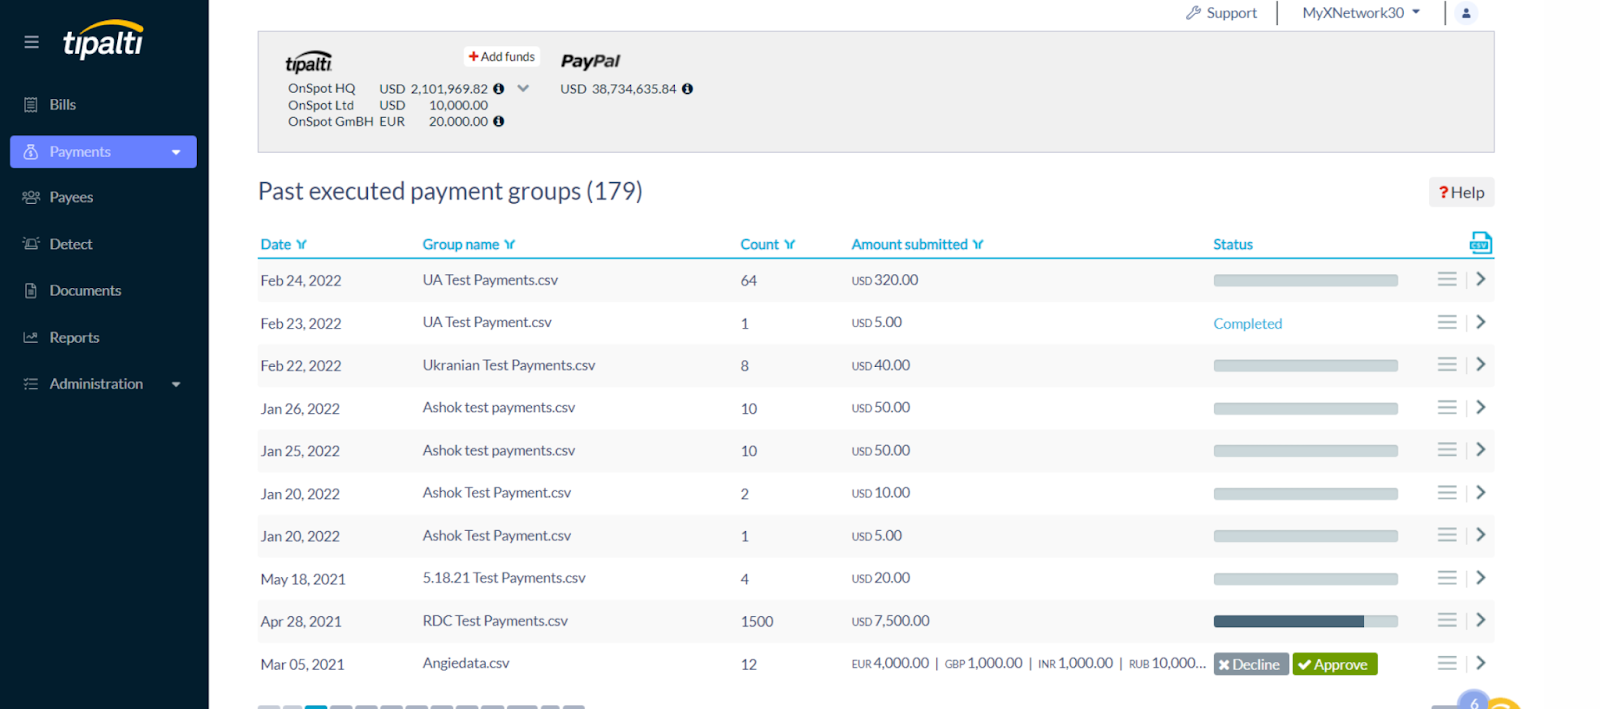 Tipalti AP Payments Dashboard 